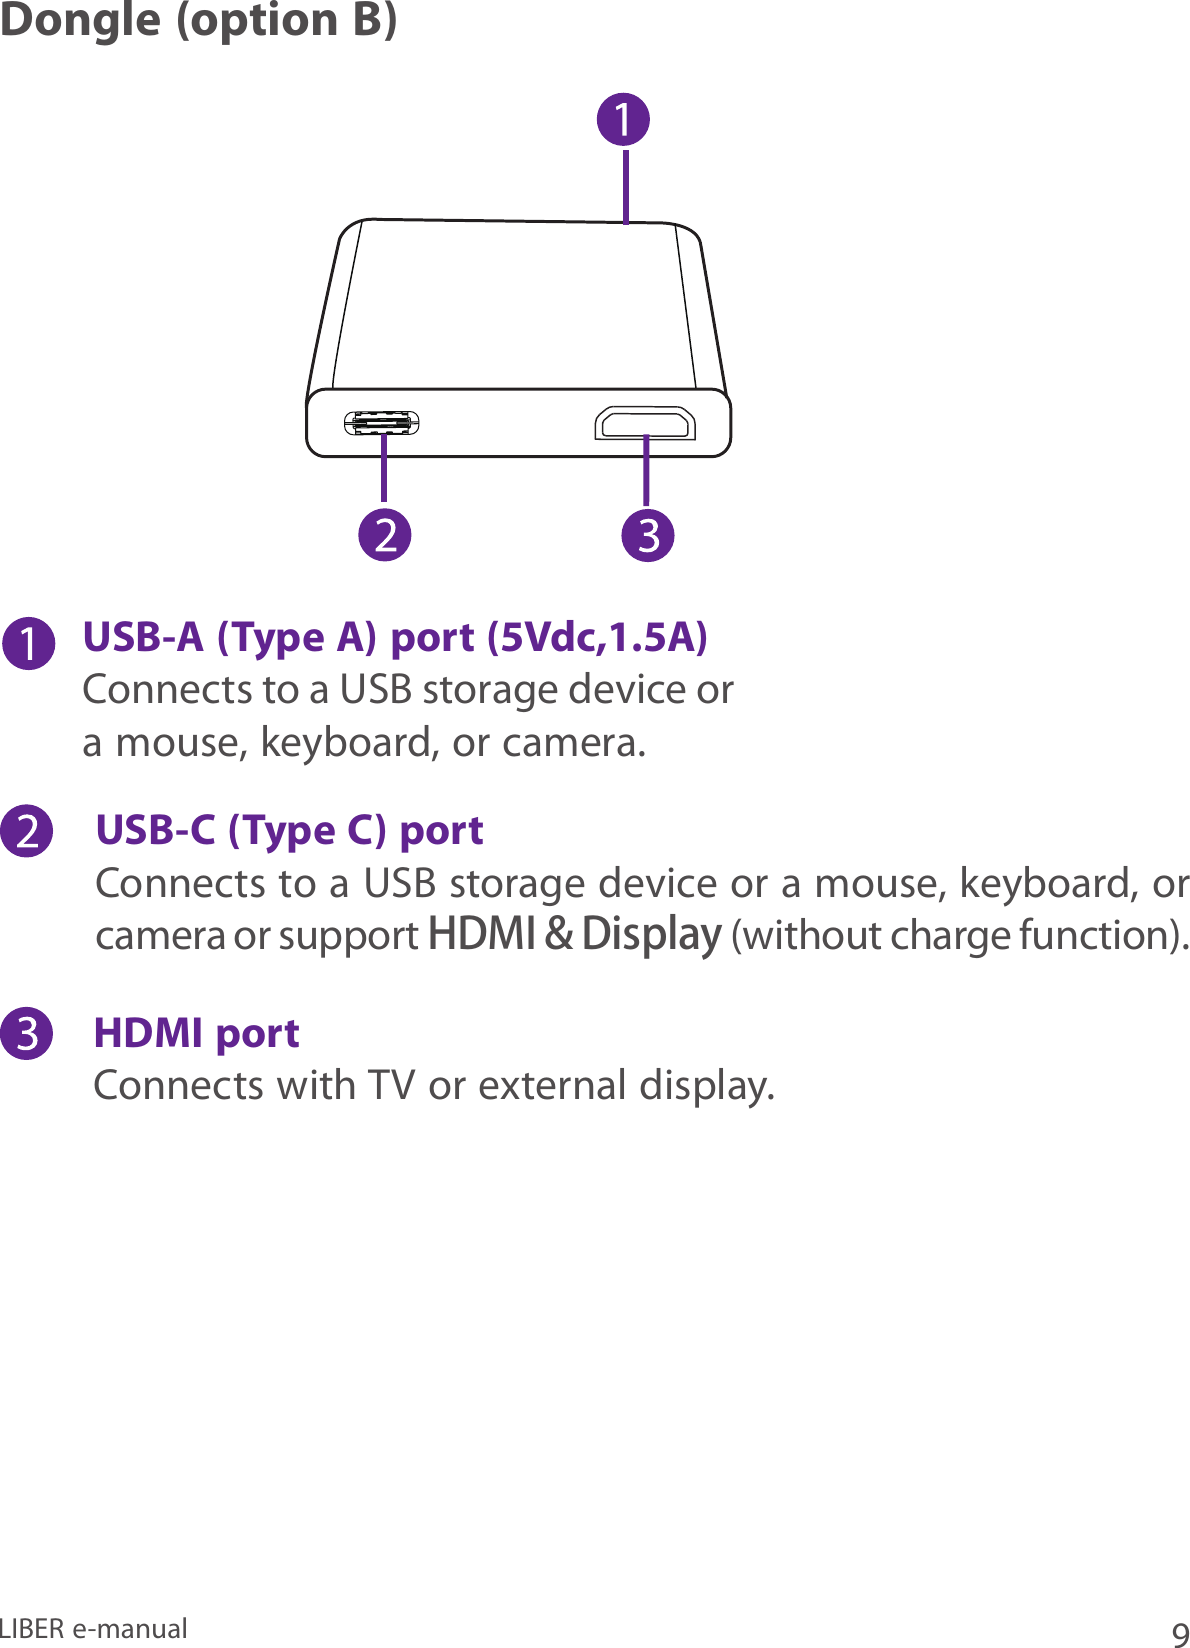 9LIBER e-manualDongle (option B)USB-A (Type A) port (5Vdc,1.5A)Connects to a USB storage device or a mouse, keyboard, or camera.HDMI portConnects with TV or external display.USB-C (Type C) port Connects to a USB storage device or a mouse, keyboard, or camera or support HDMI &amp; Display (without charge function).